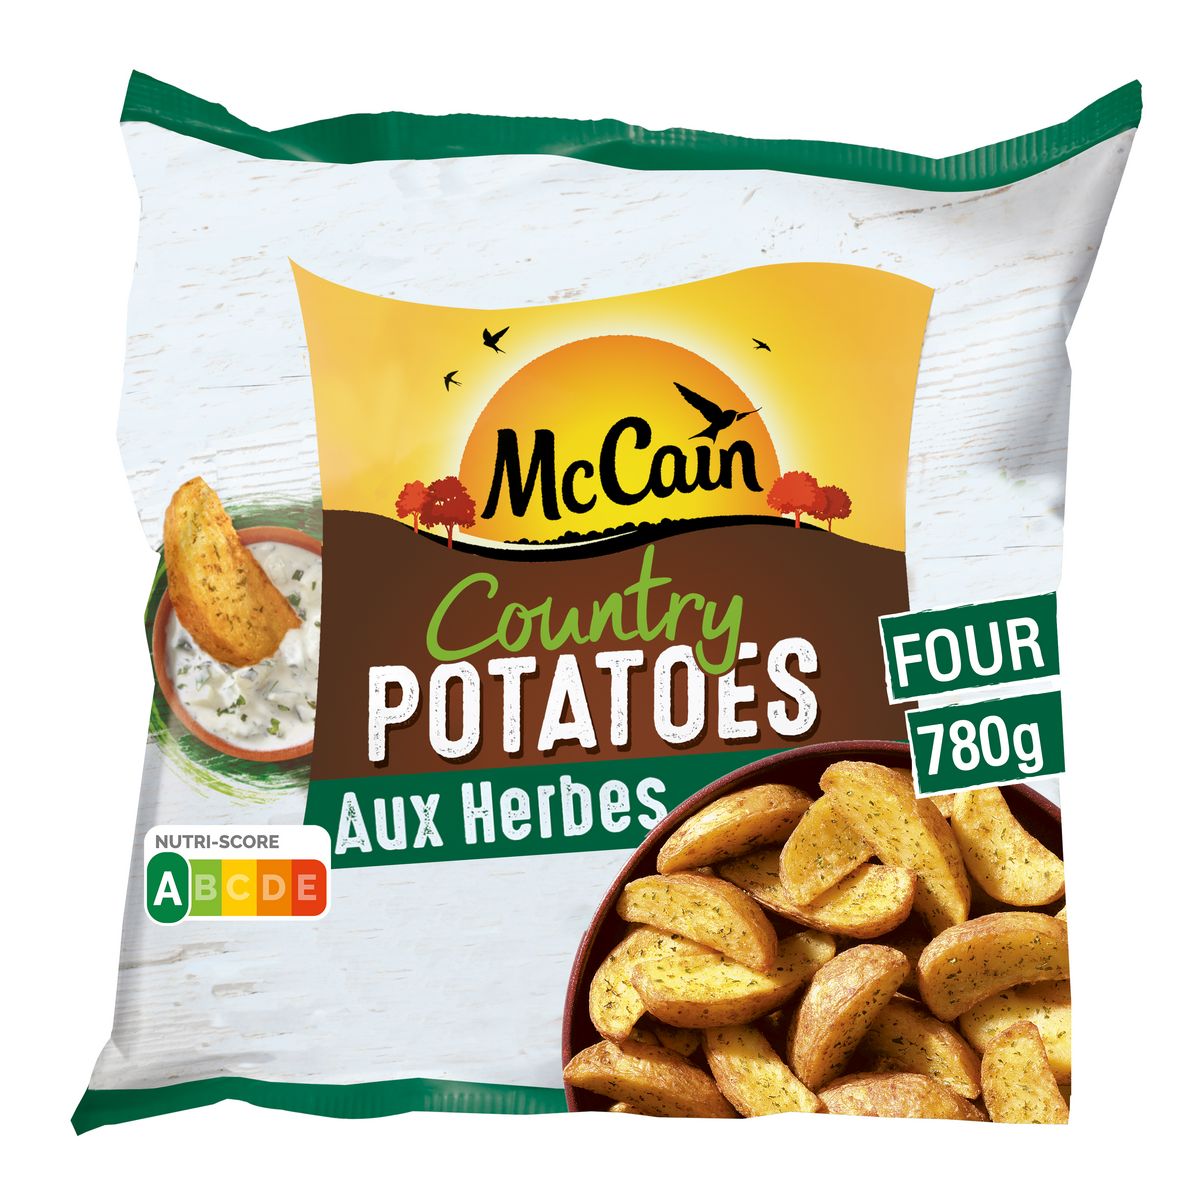 MCCAIN Country potatoes aux herbes 780g